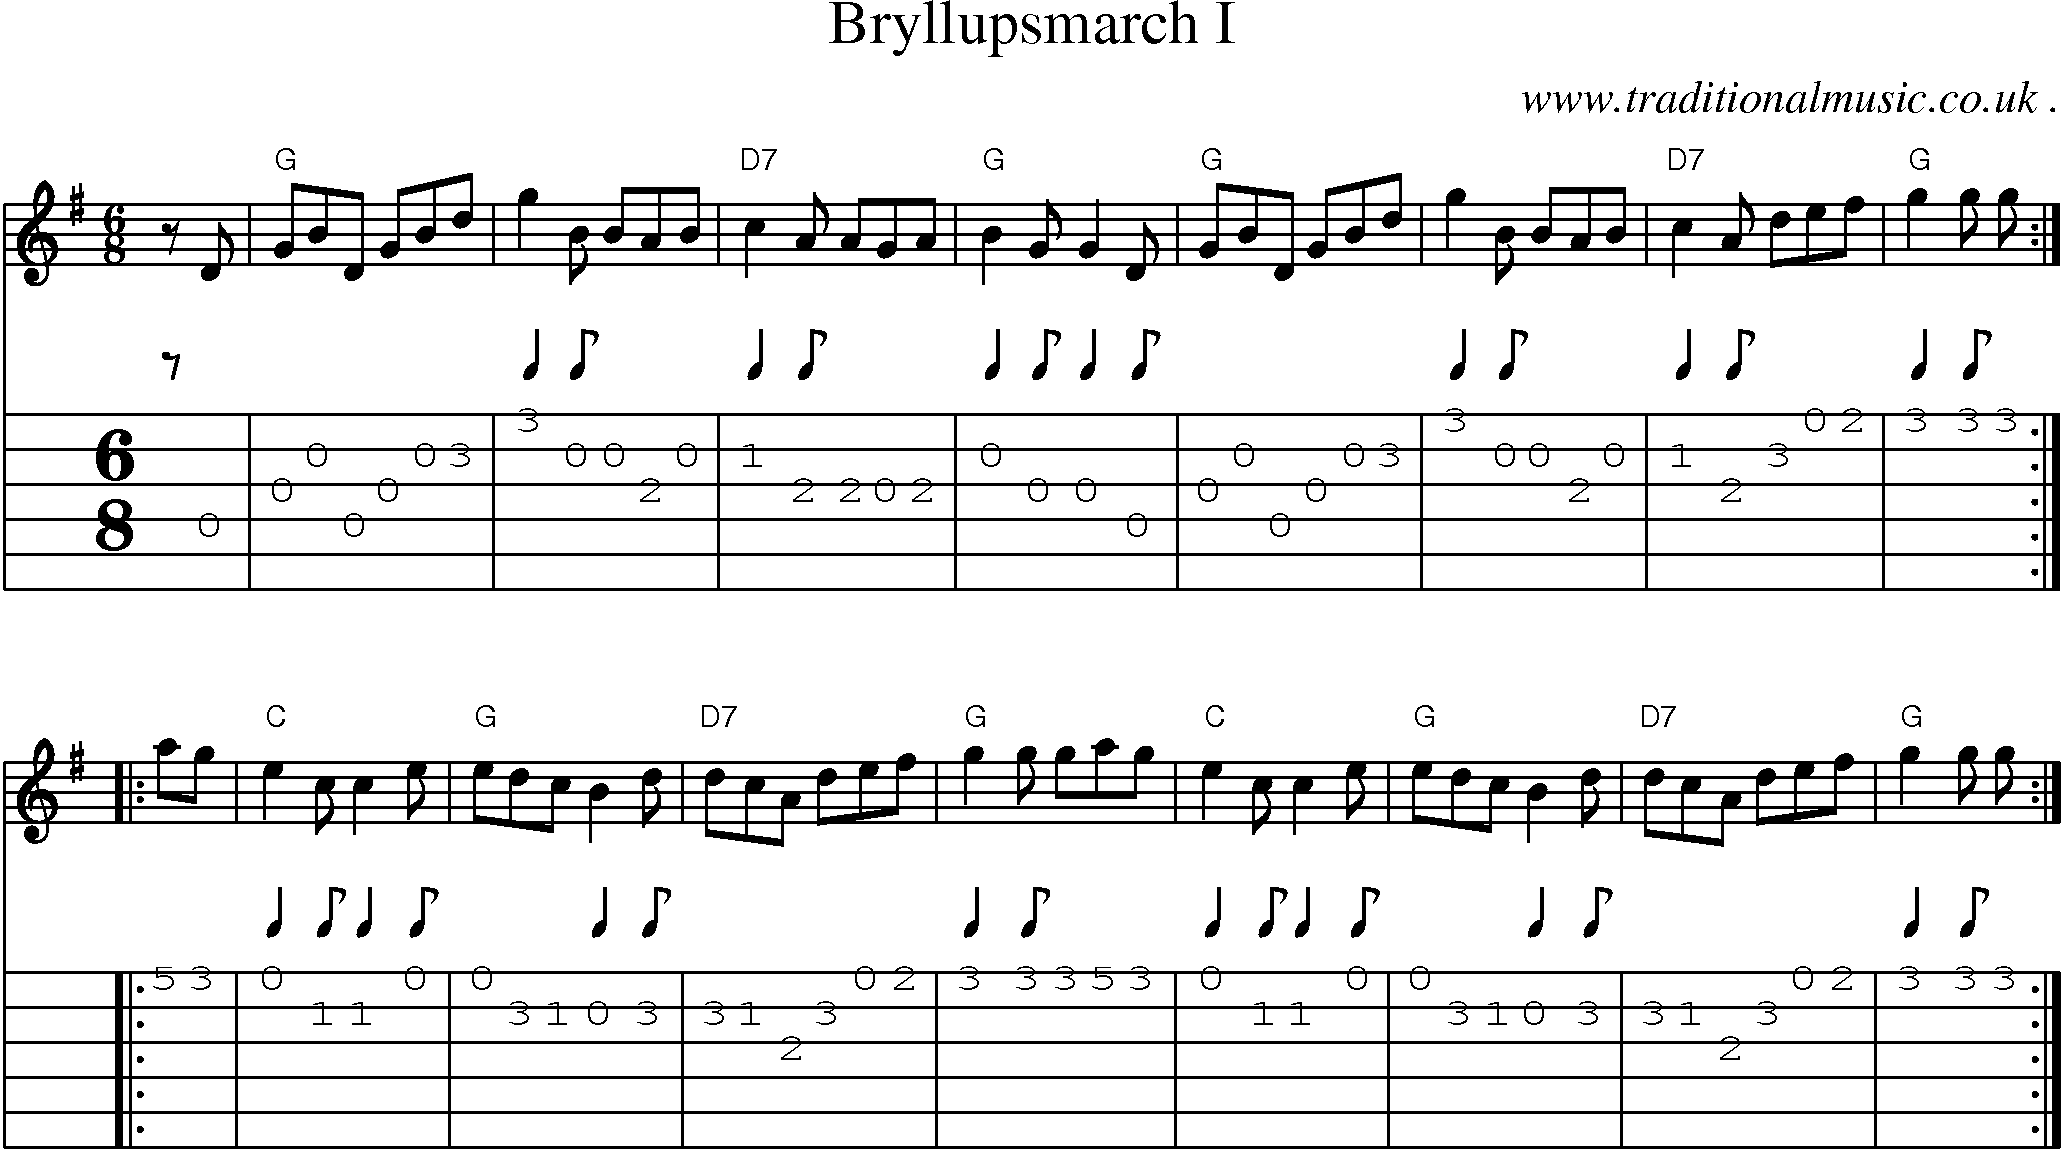 Sheet-music  score, Chords and Guitar Tabs for Bryllupsmarch I